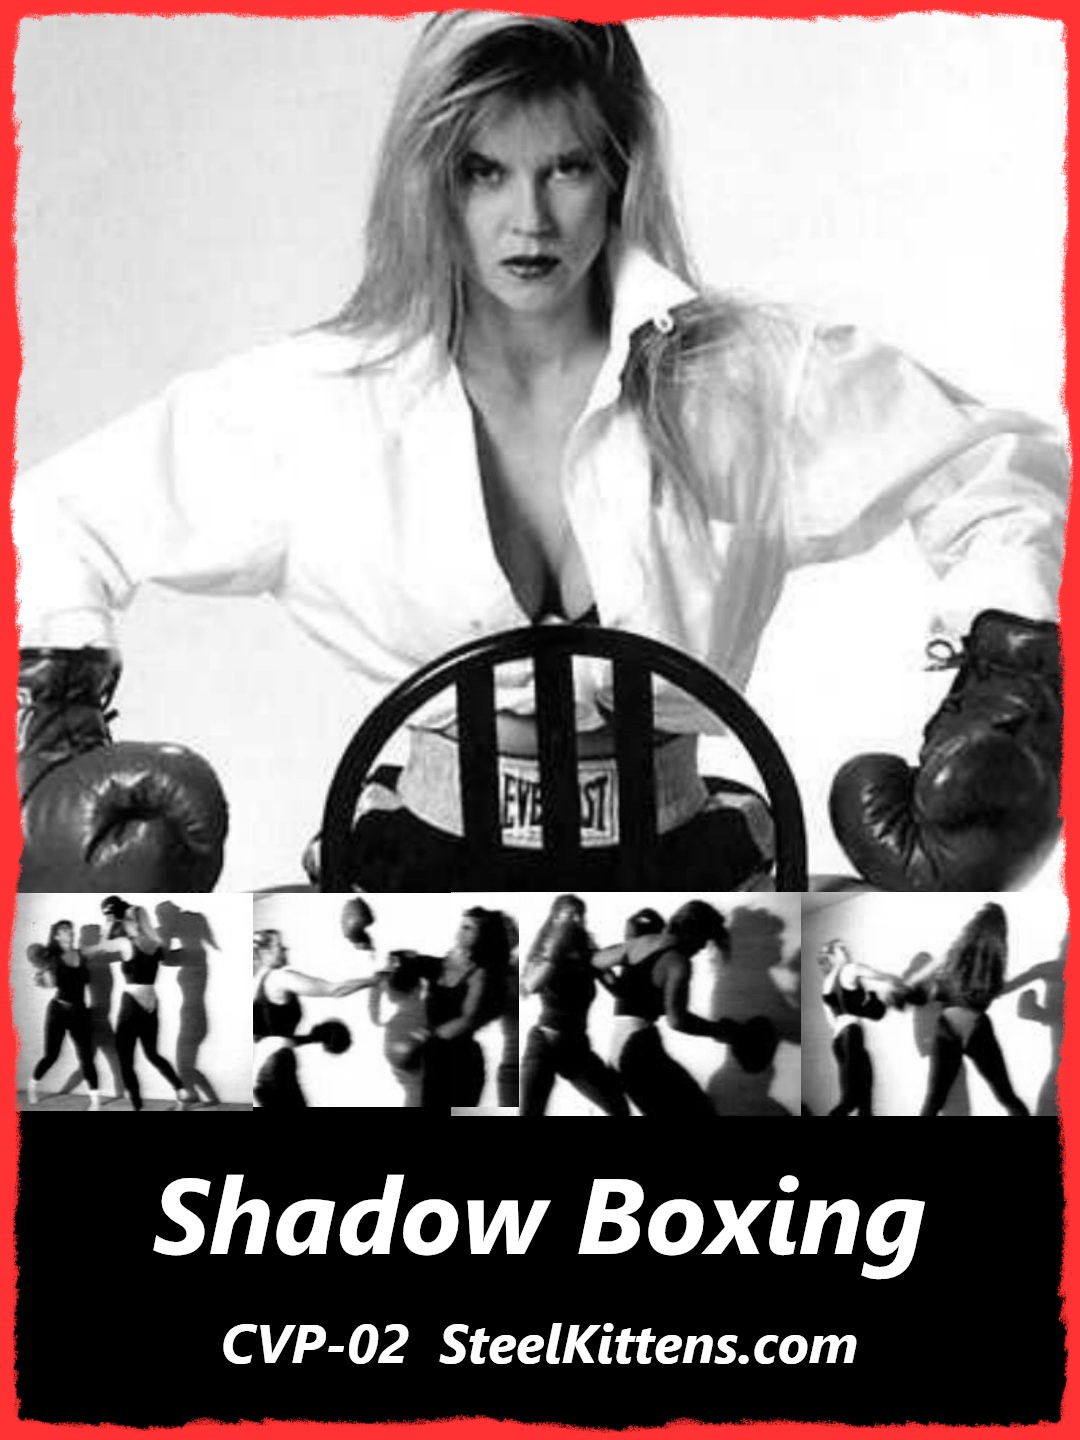 DVD: Shadow Boxing